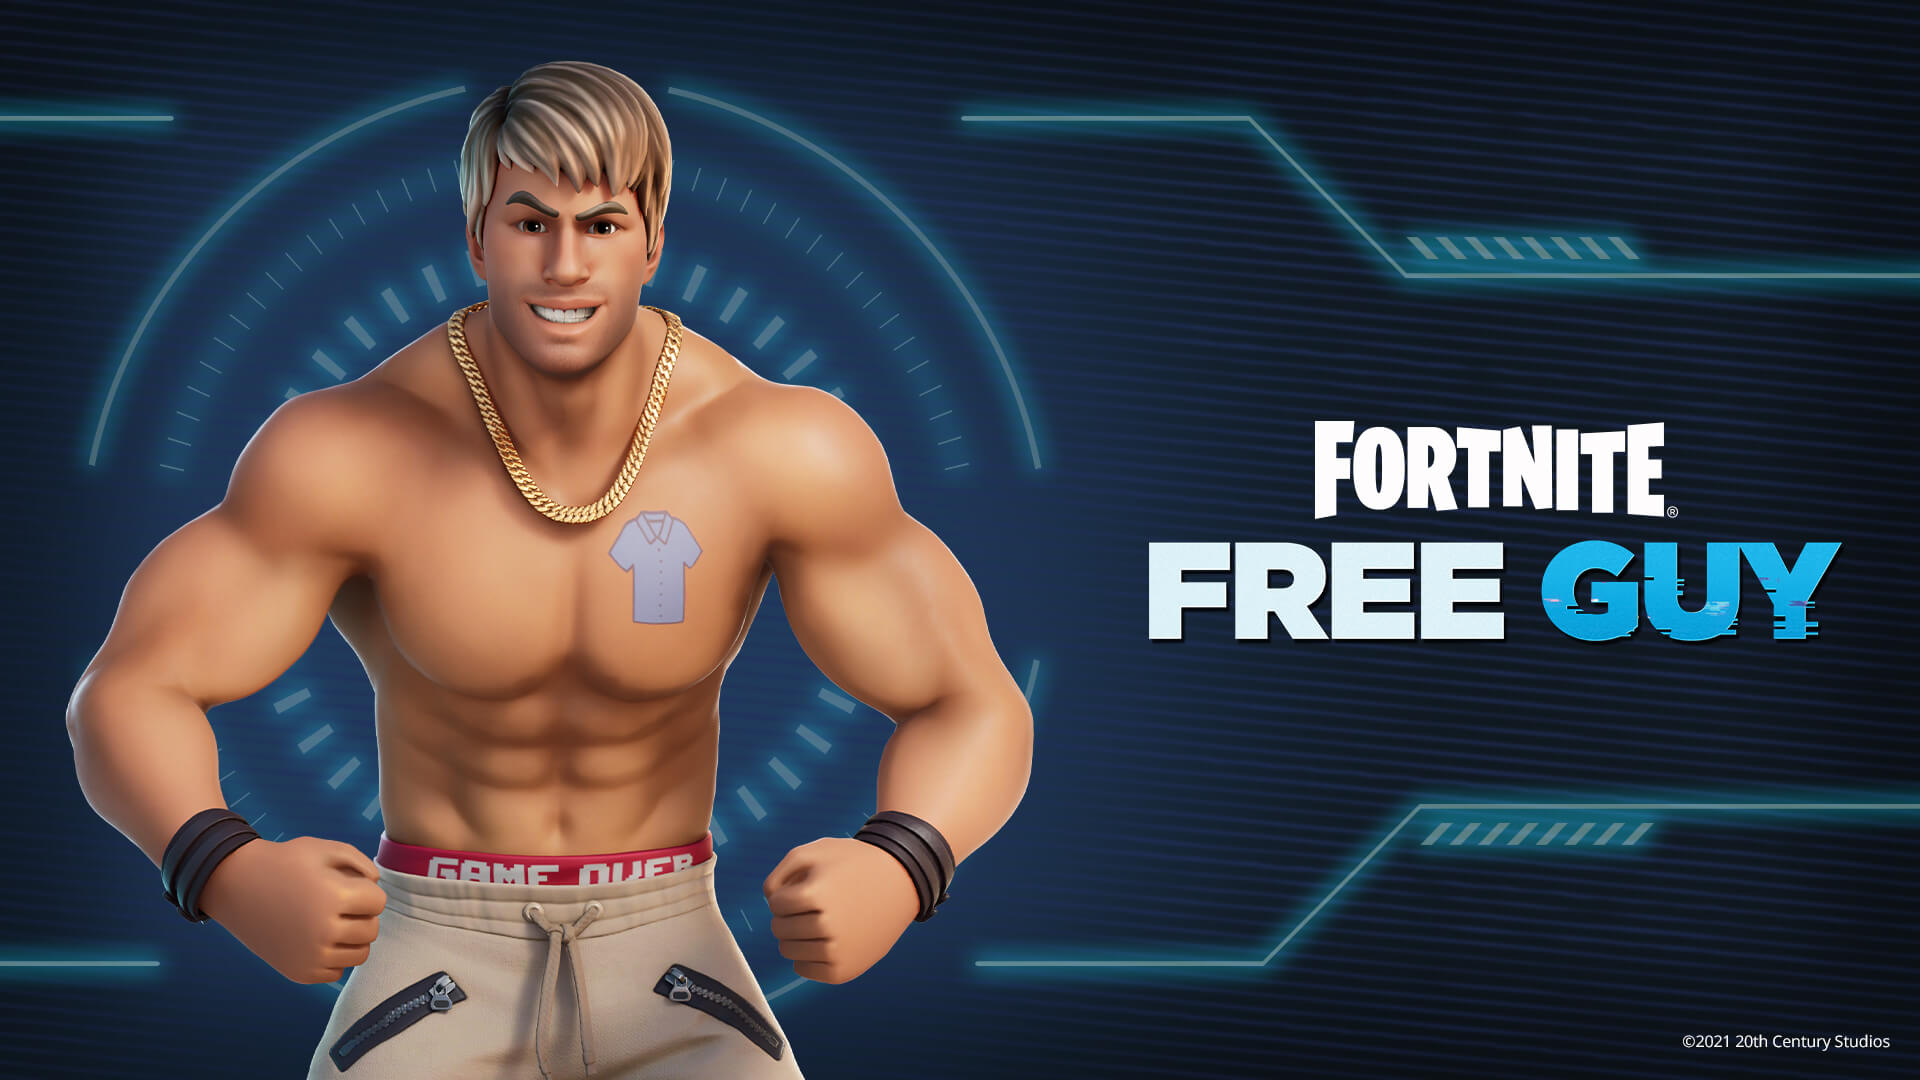 How To Get Cammy Skin & Guile Skin FREE In Fortnite! (Unlock Cammy